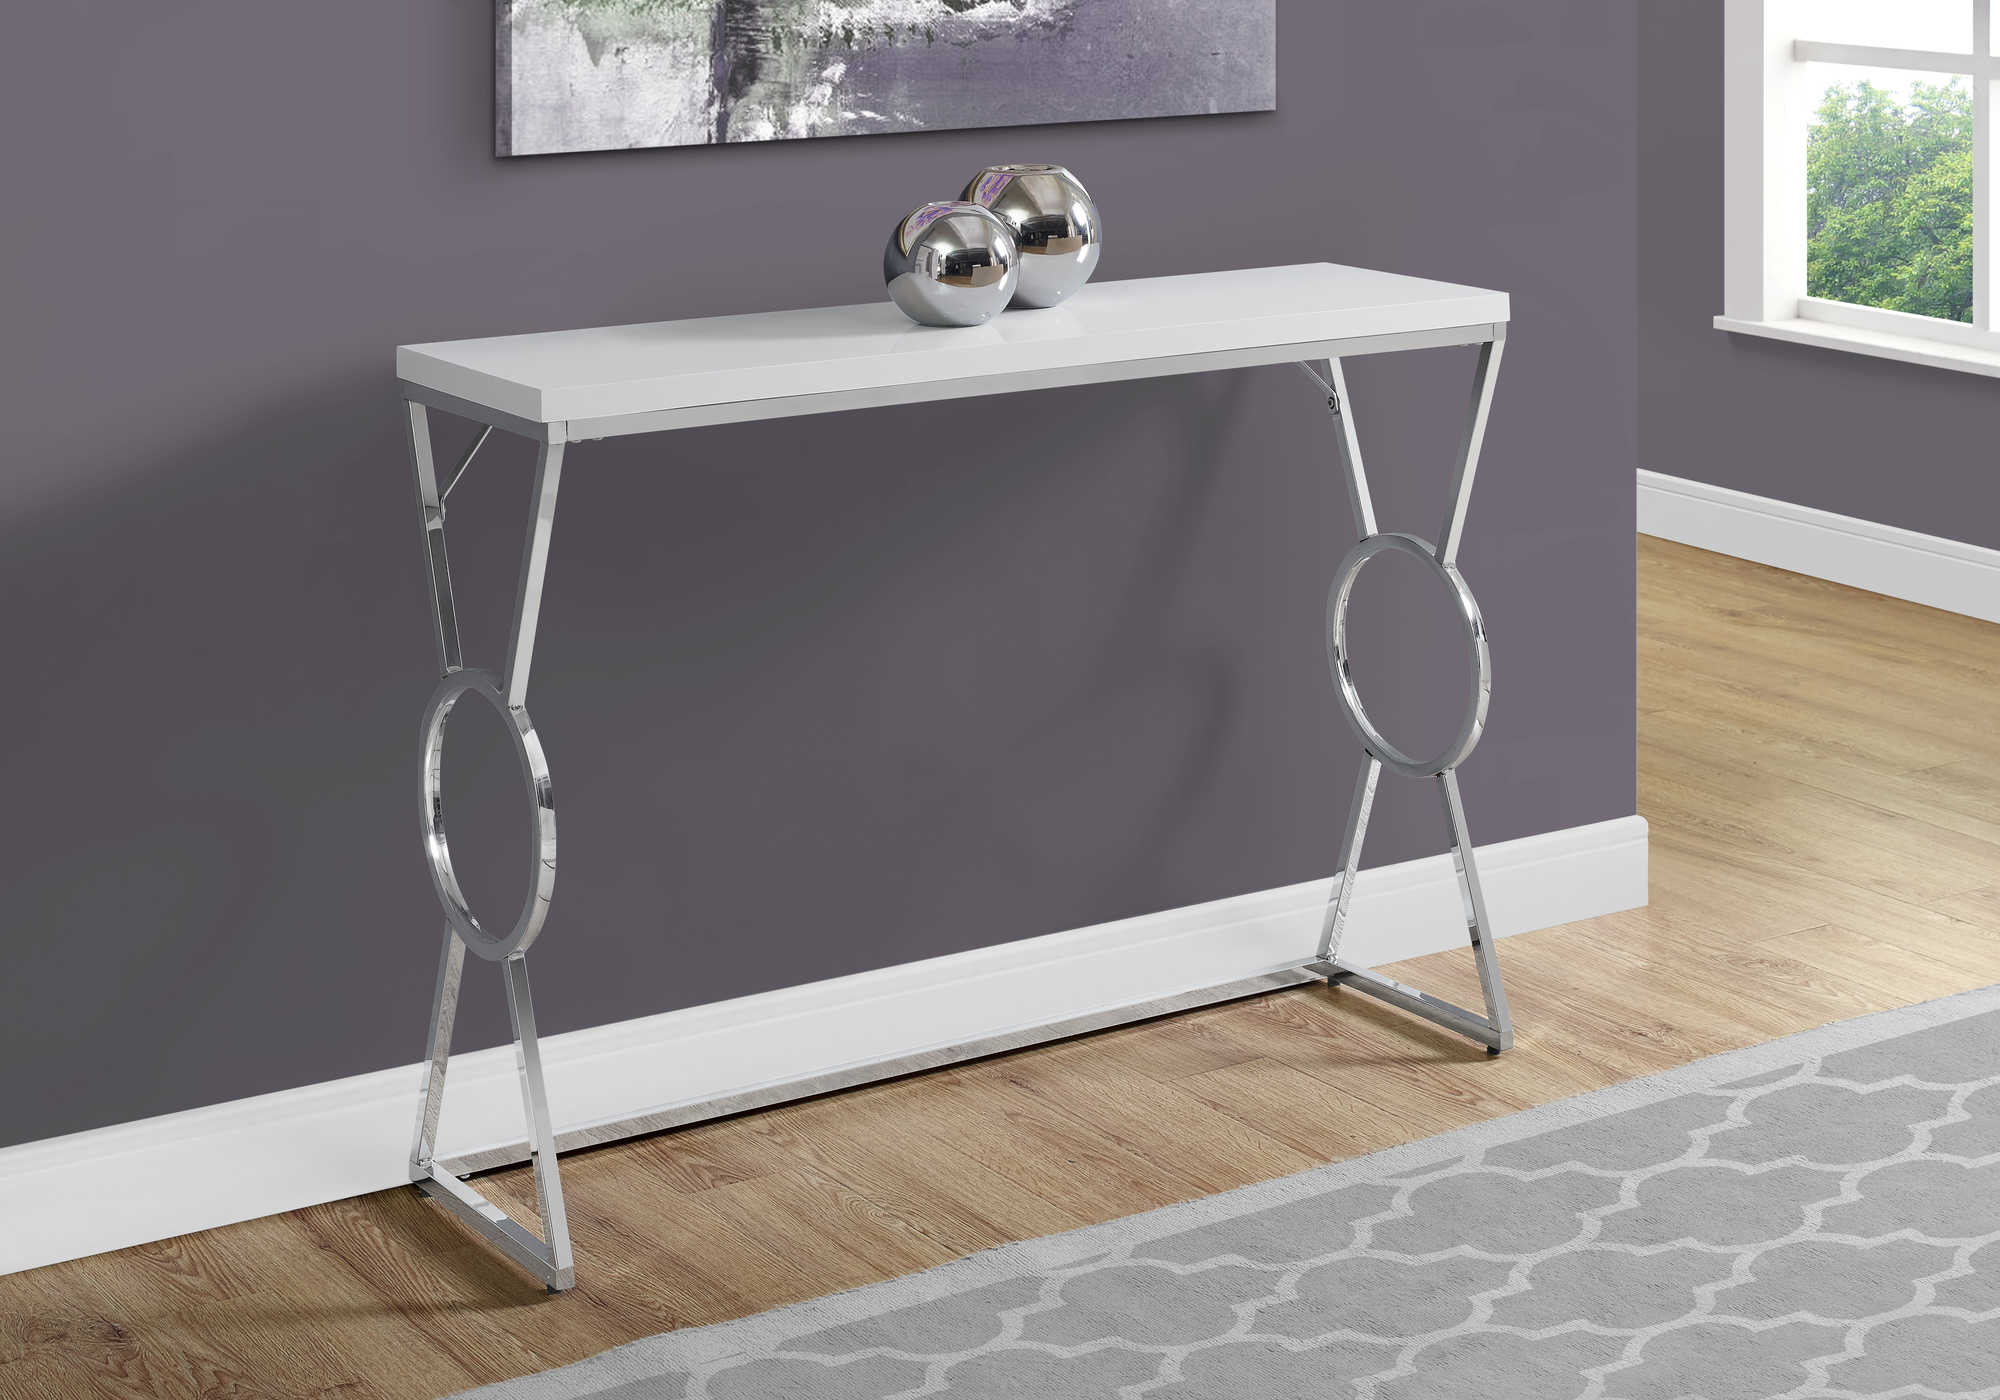 ACCENT TABLE - 42"L / GLOSSY WHITE / CHROME METAL